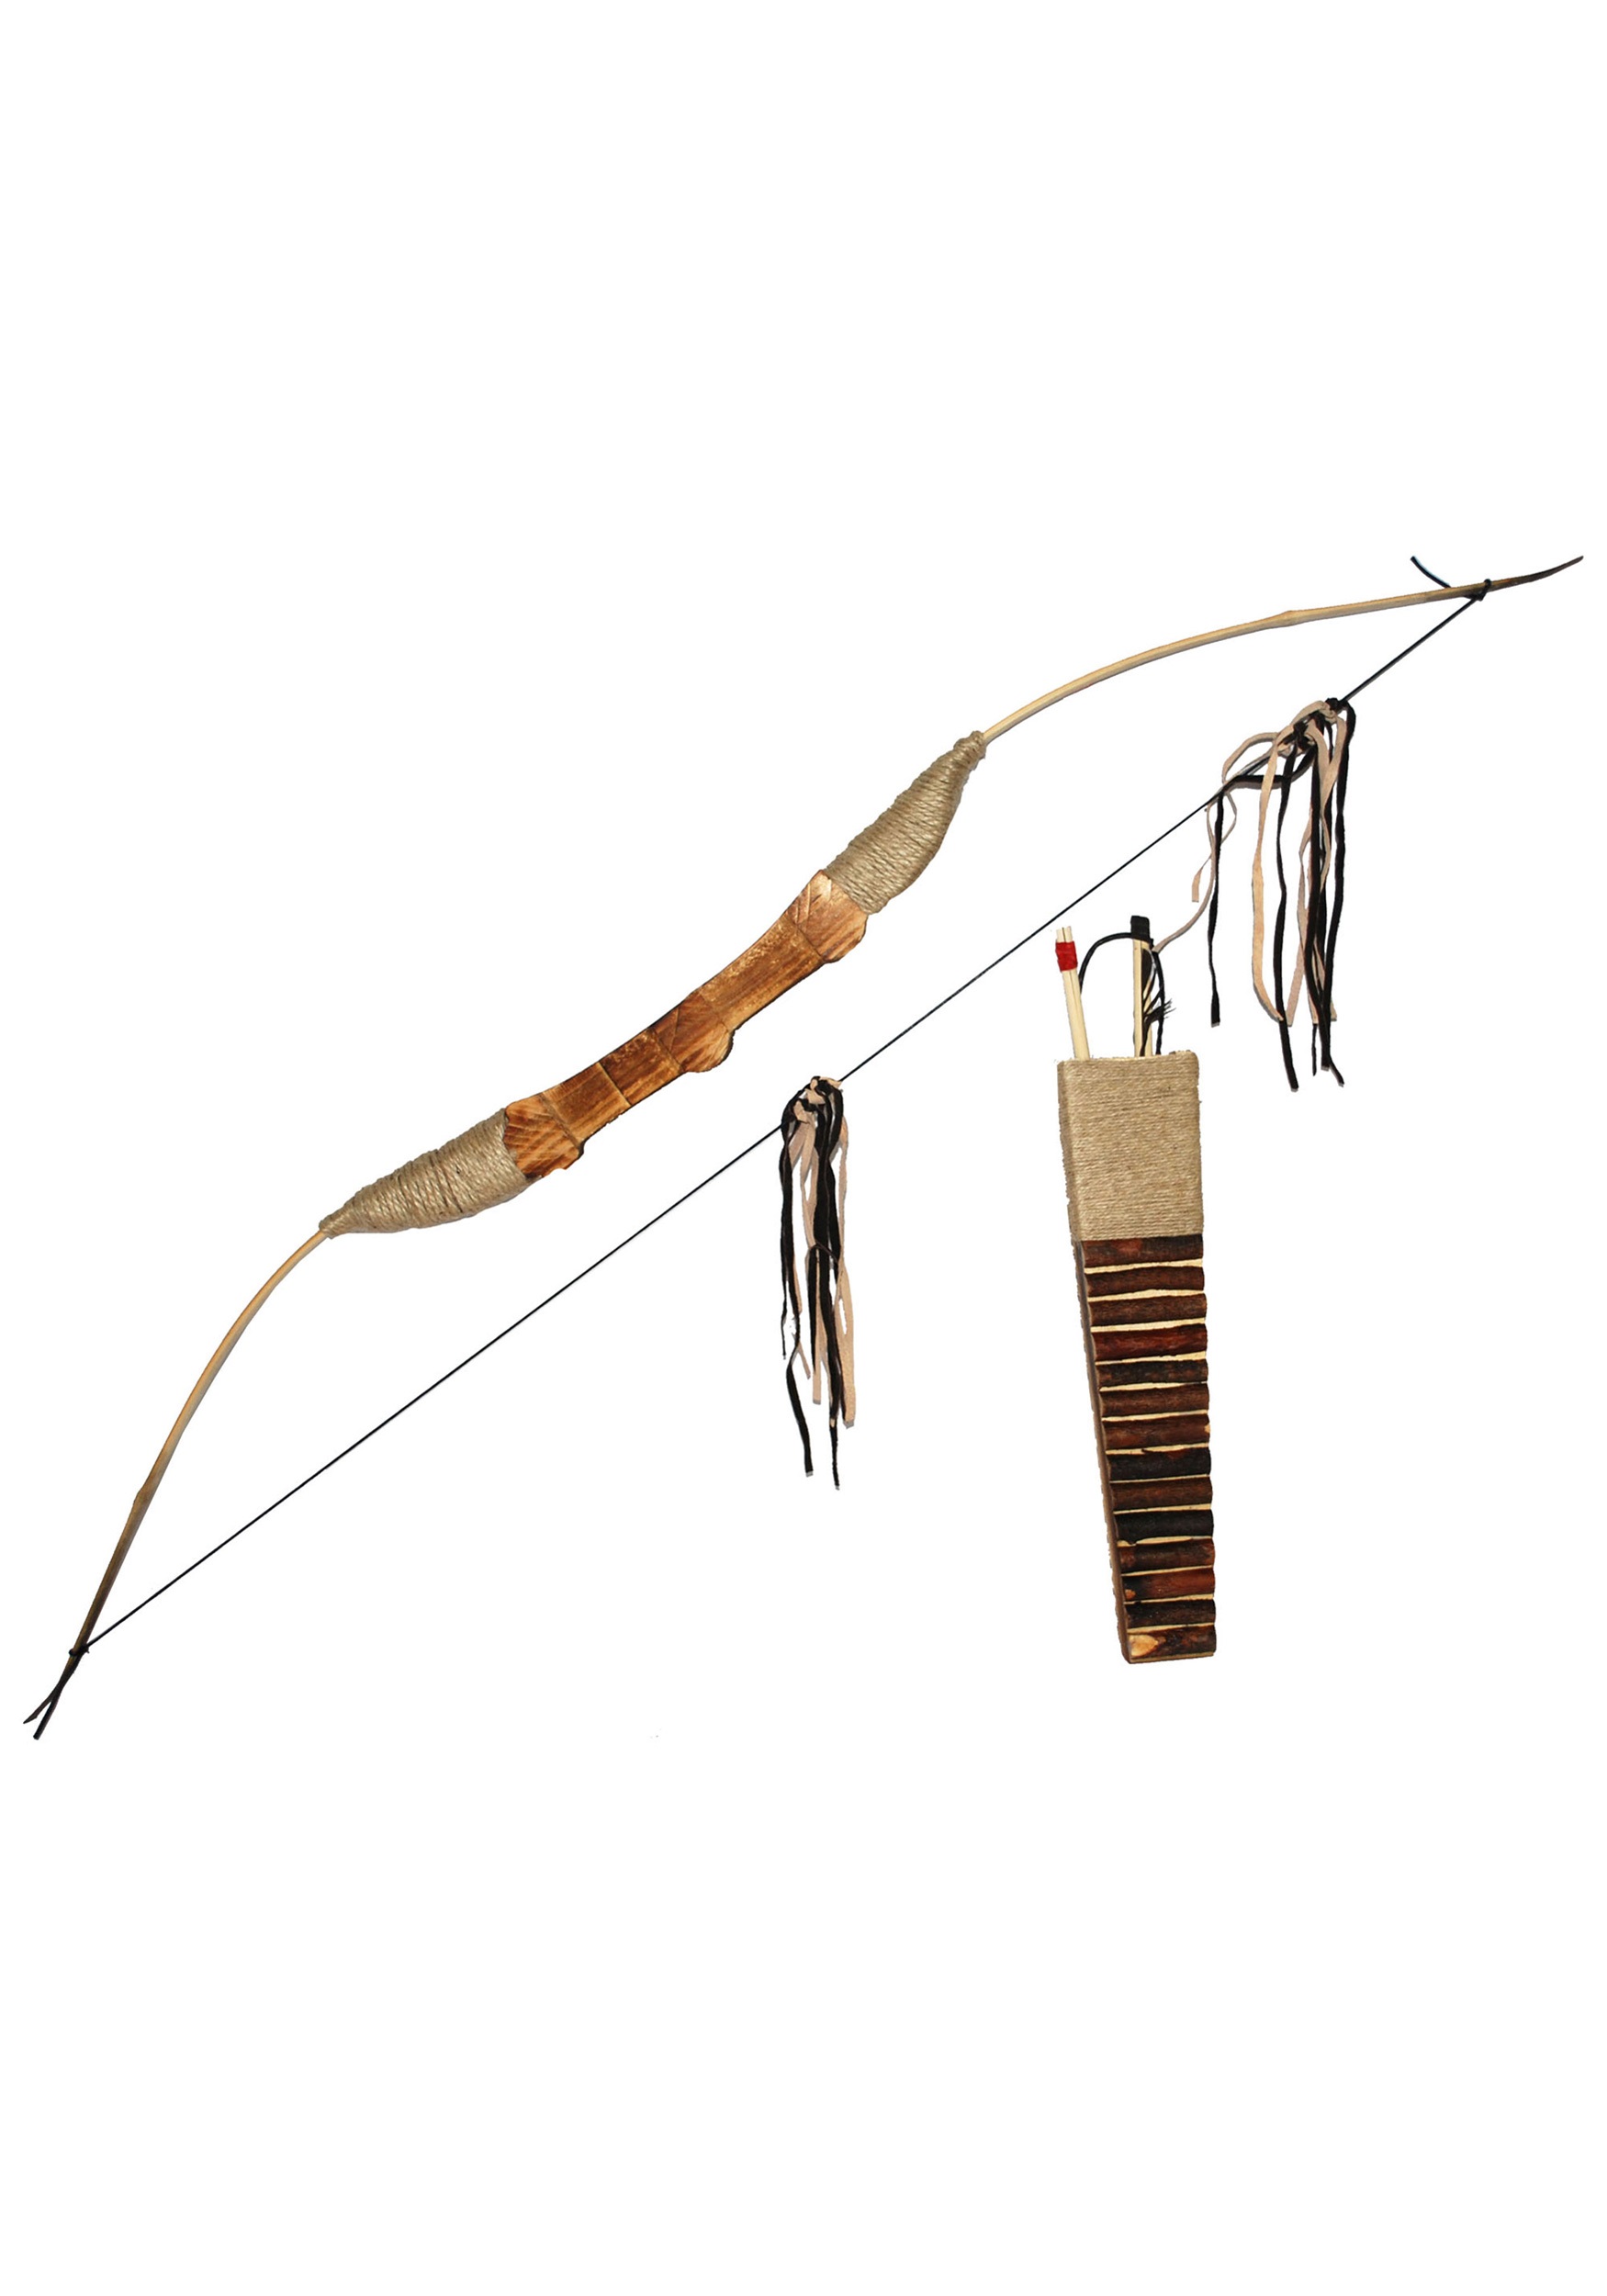 Best Photos of Indian Bow And Arrow - Indian Bow and Arrow Costume ...